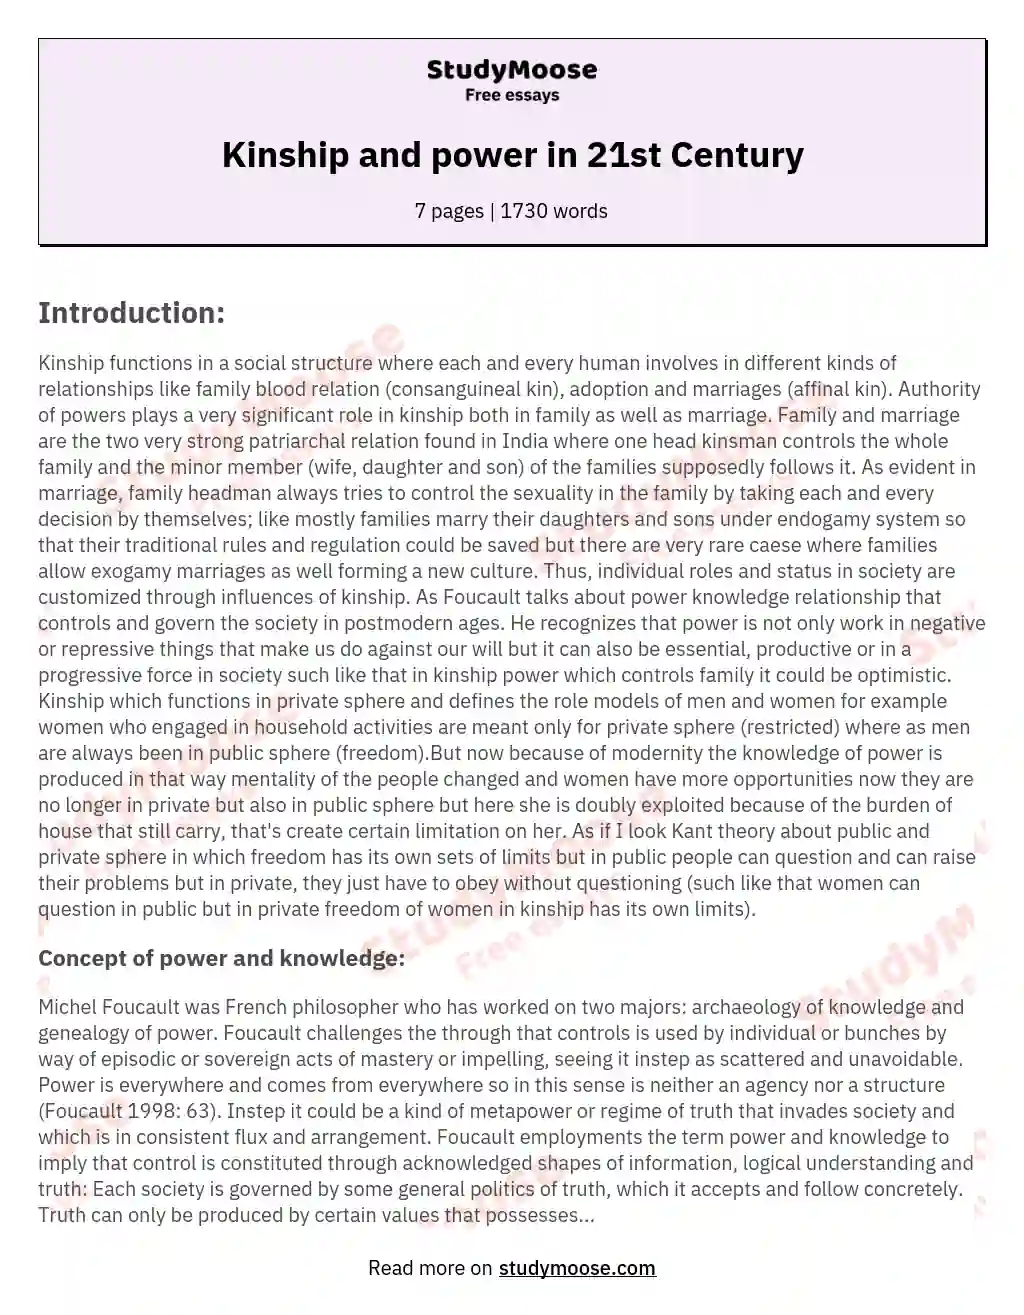 Kinship and power in 21st Century essay